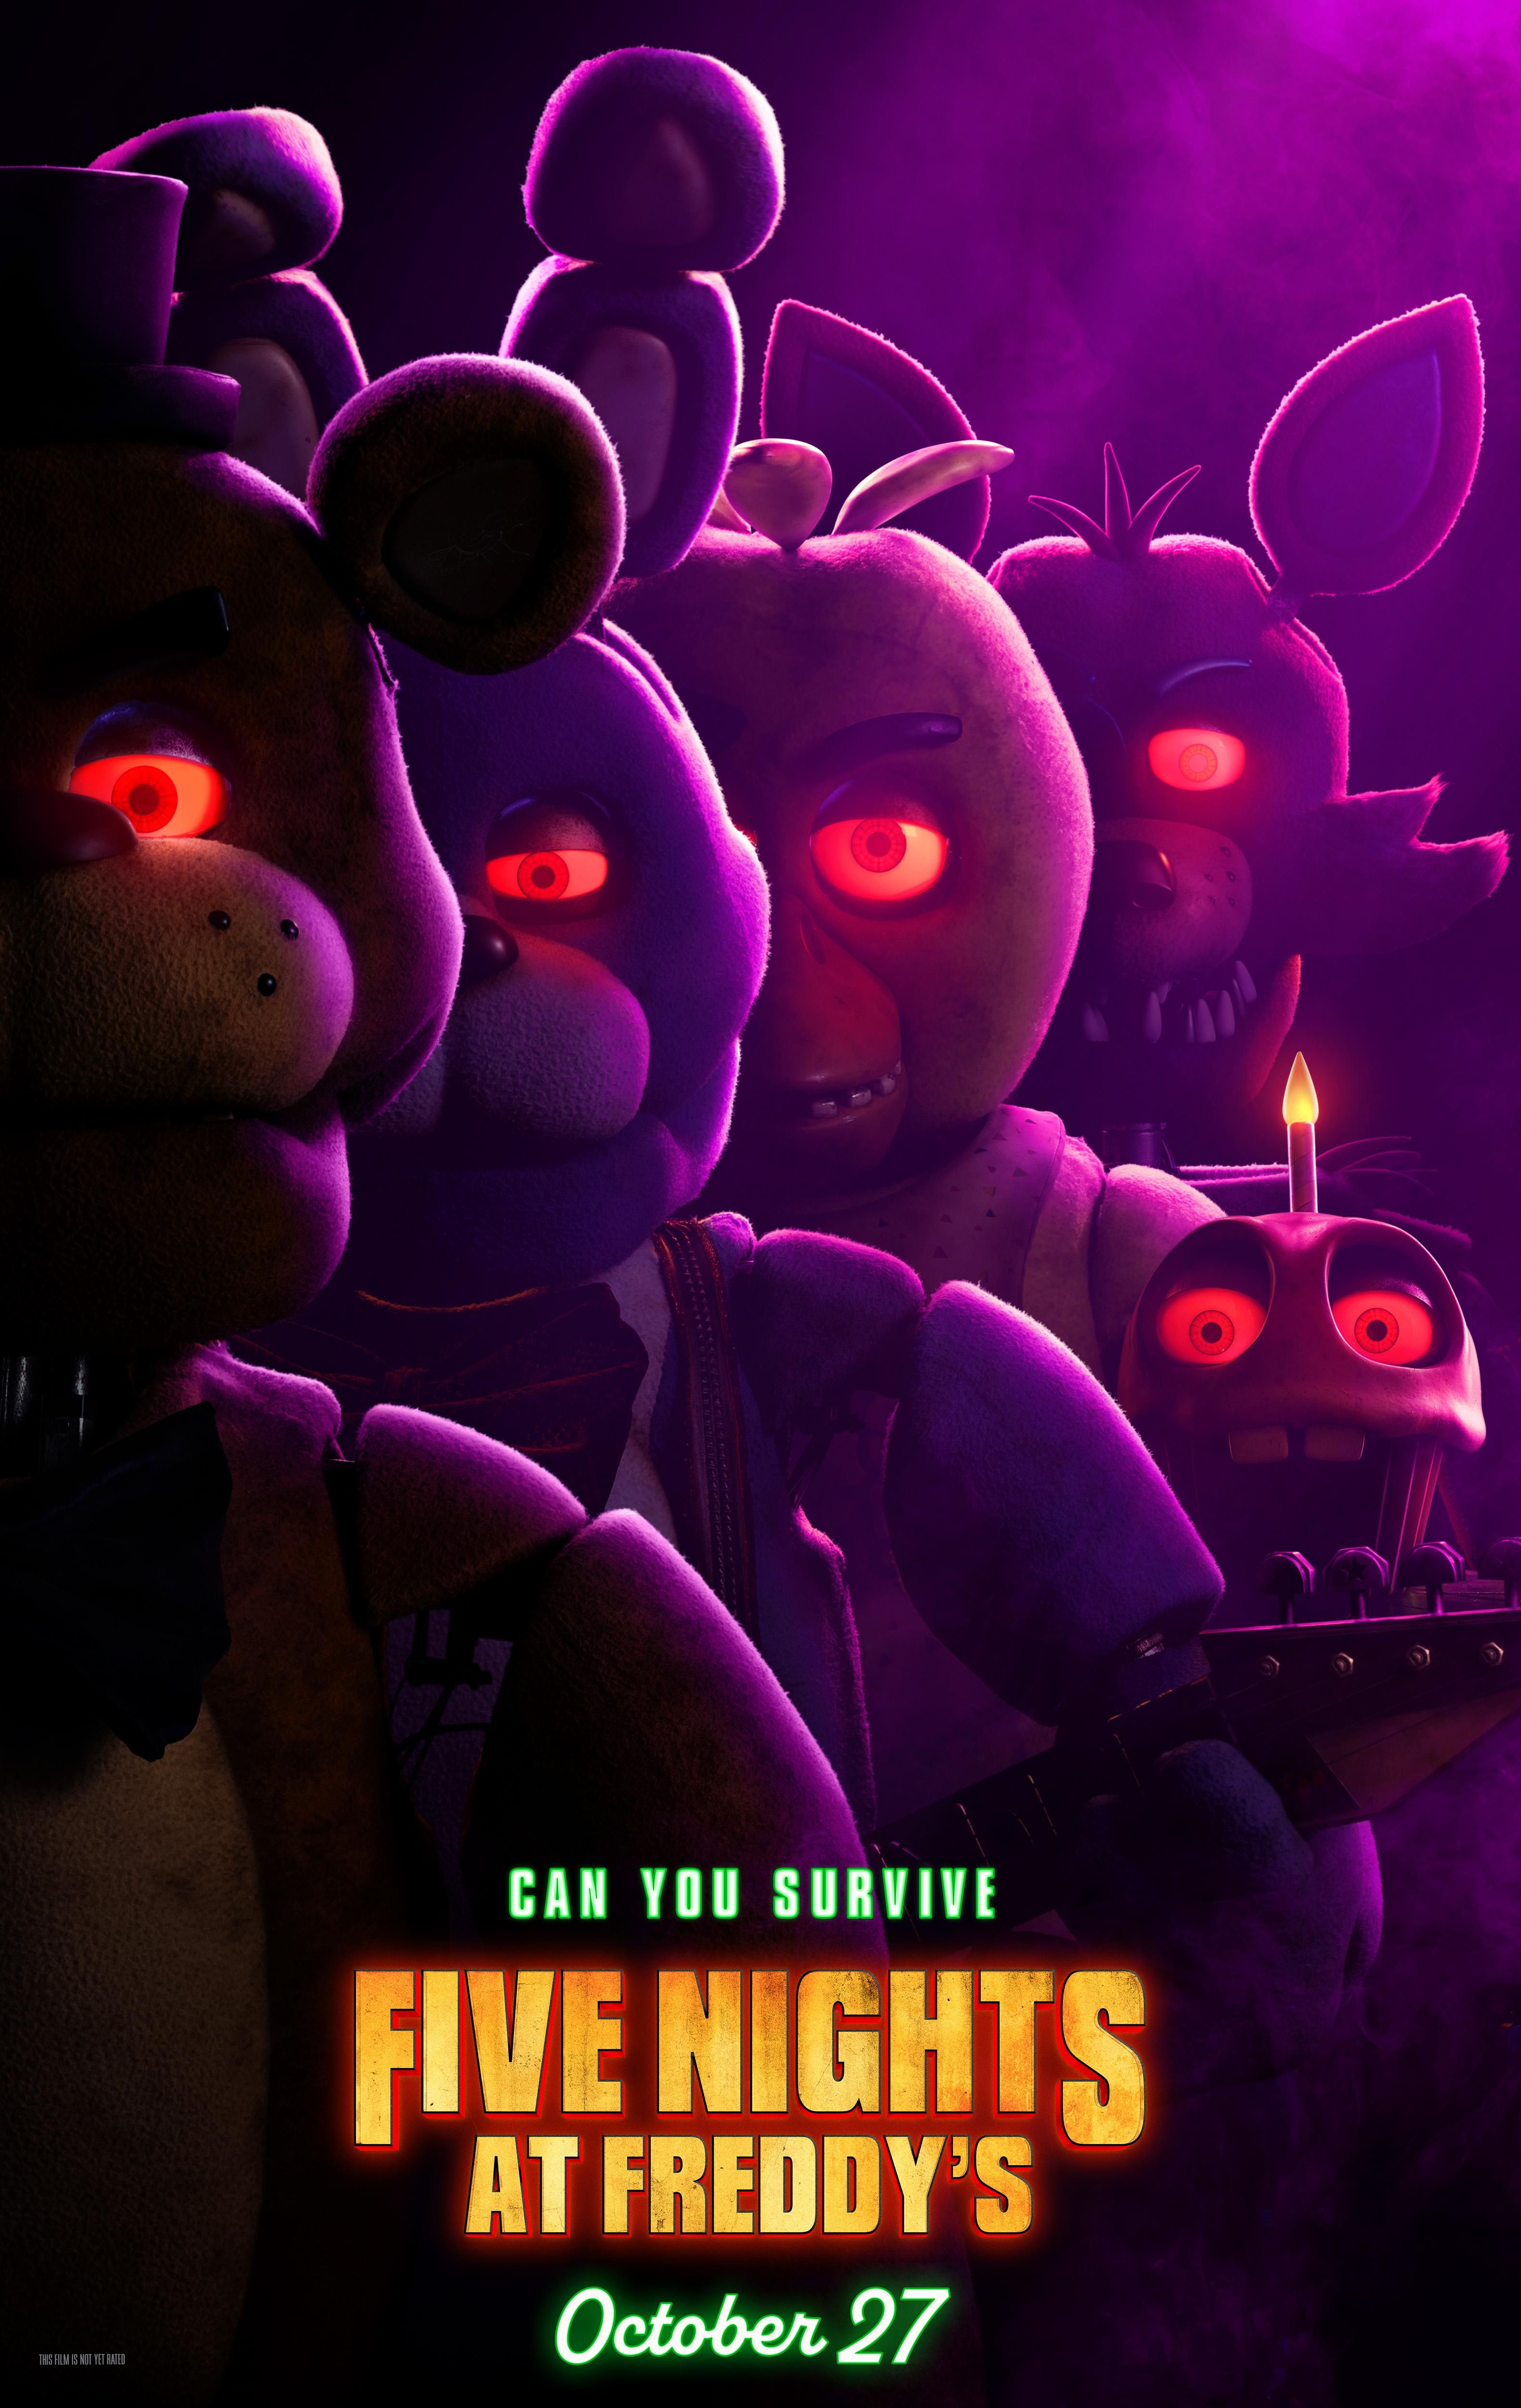 What Awaits Us in the Lore of the New Five Nights at Freddy's?